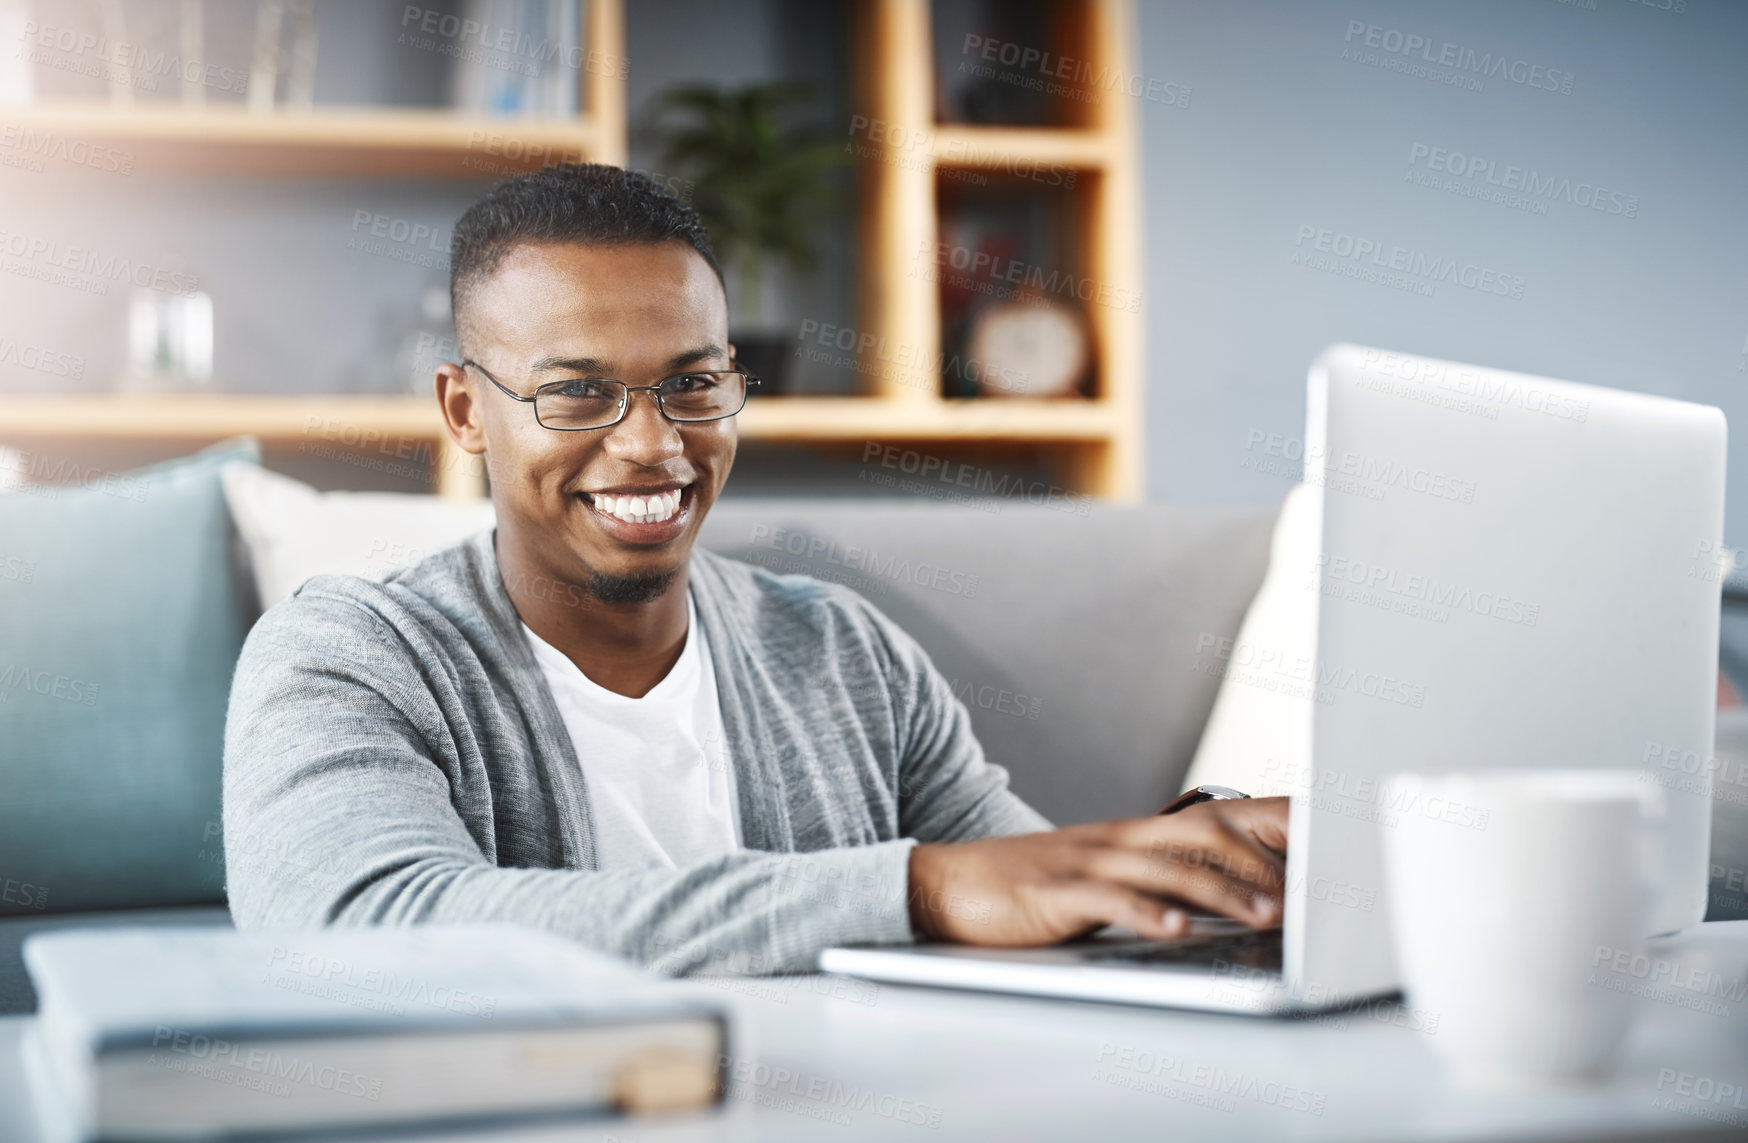 Buy stock photo Portrait of a happy young man using a laptop while relaxing at home